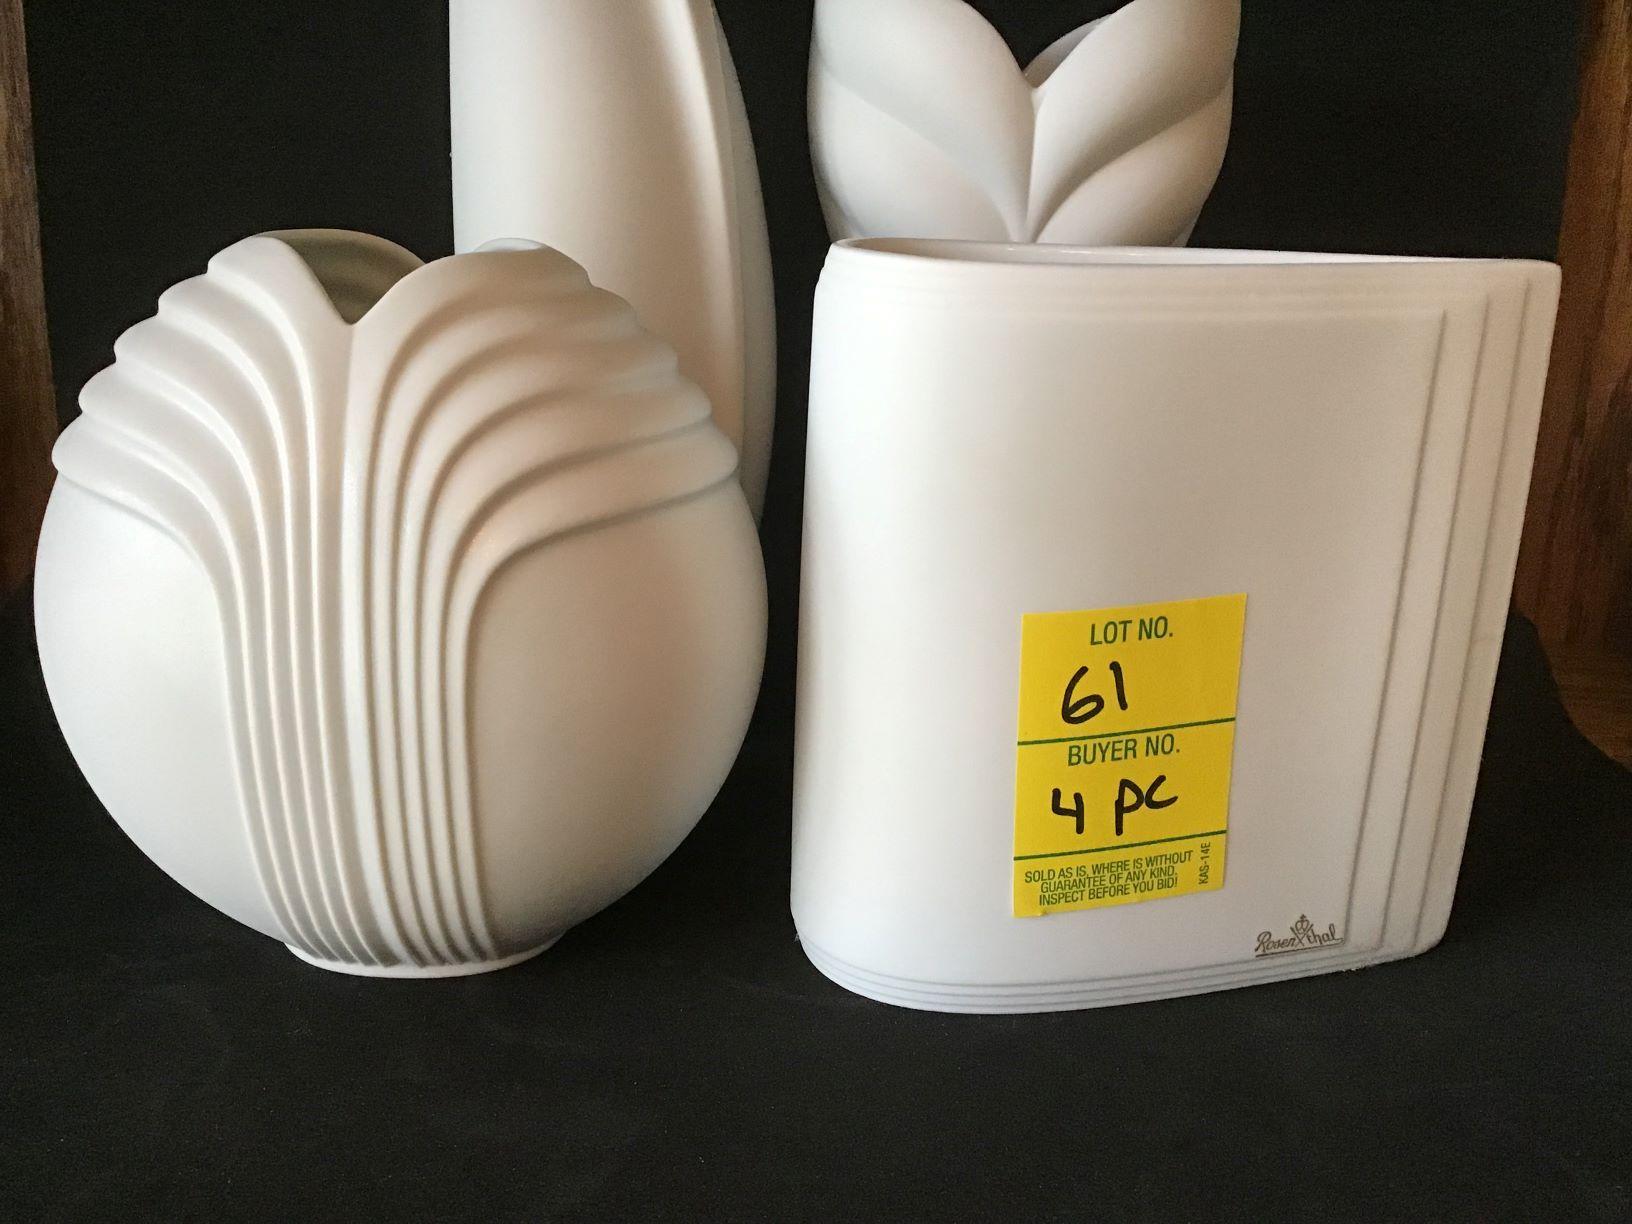 GROUP OF 4 CONTEMPORARY ROSENTHAL VASES  WITH MATTE FINISH